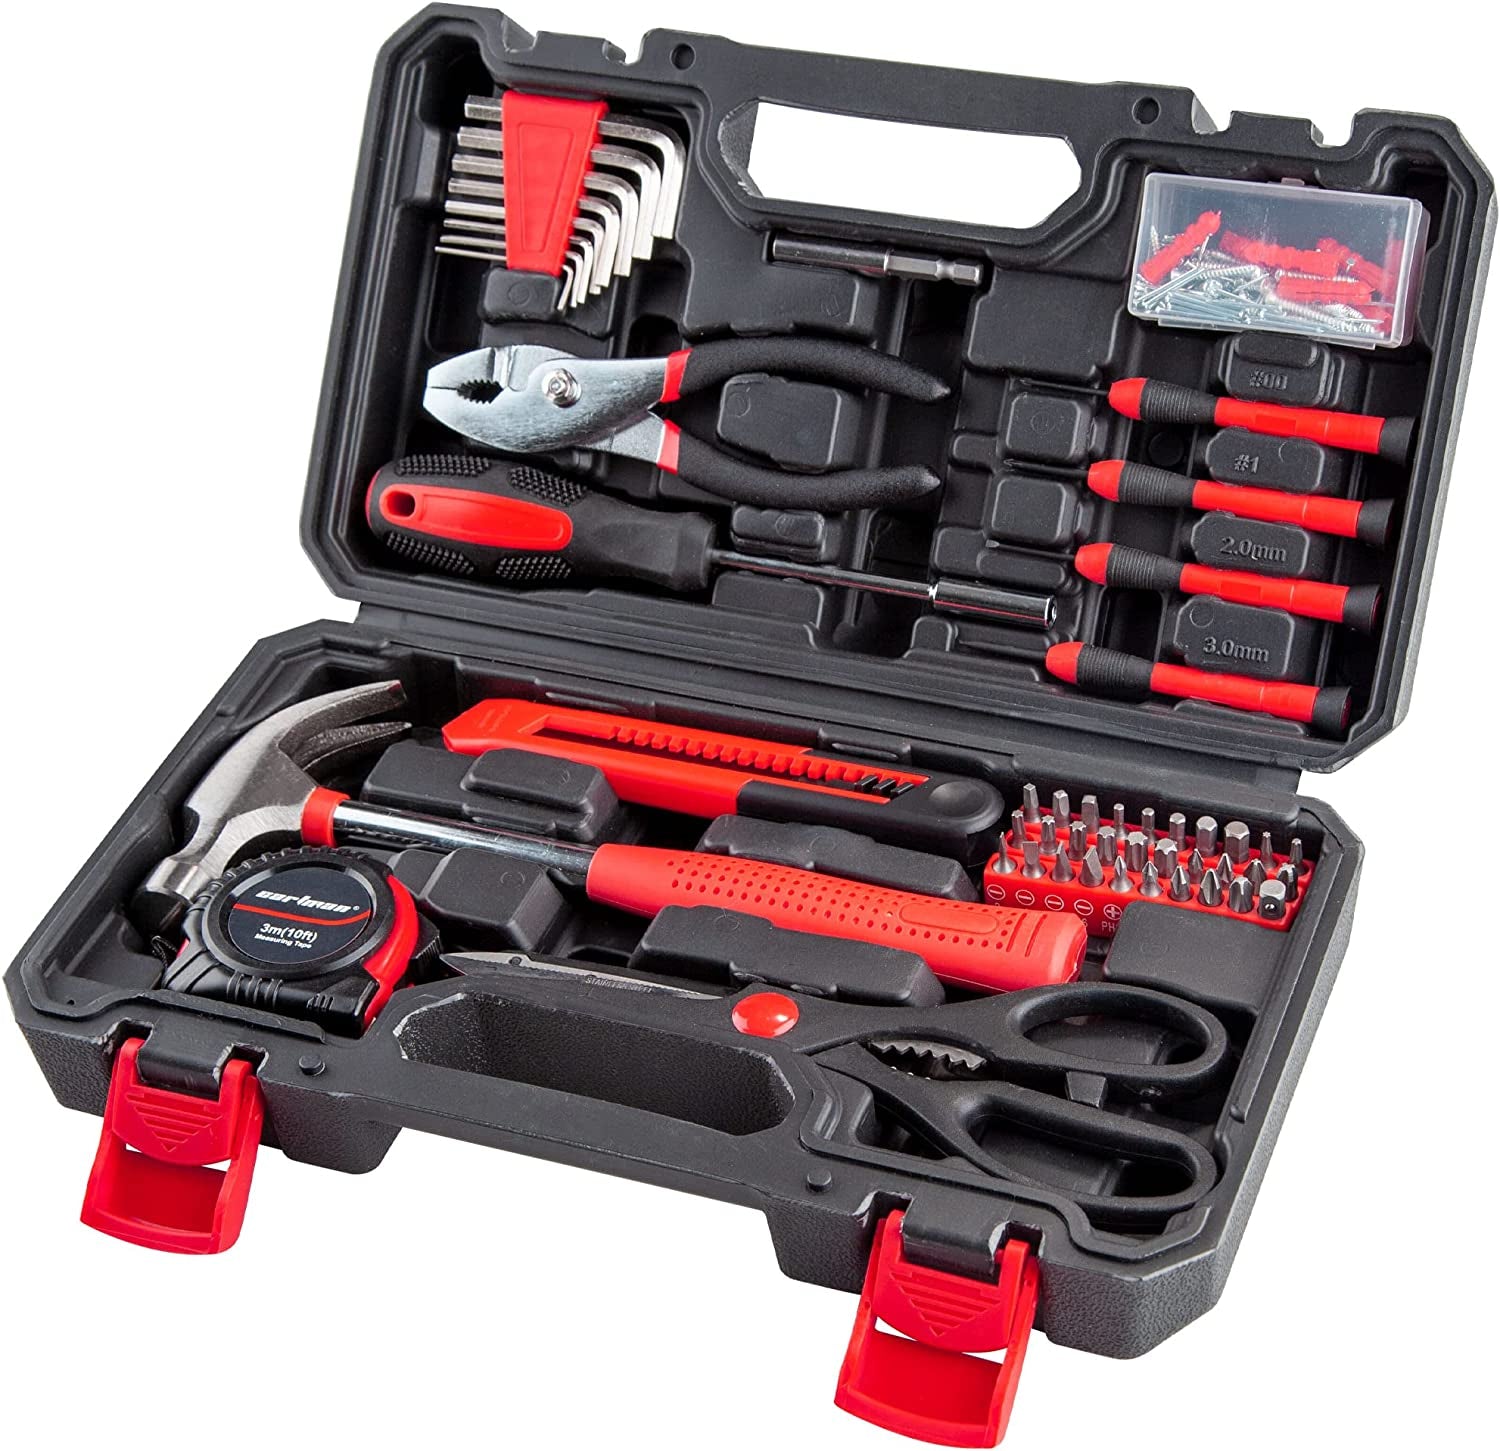 Tool Set General Household Hand Tool Kit with Plastic Toolbox Storage Case Red